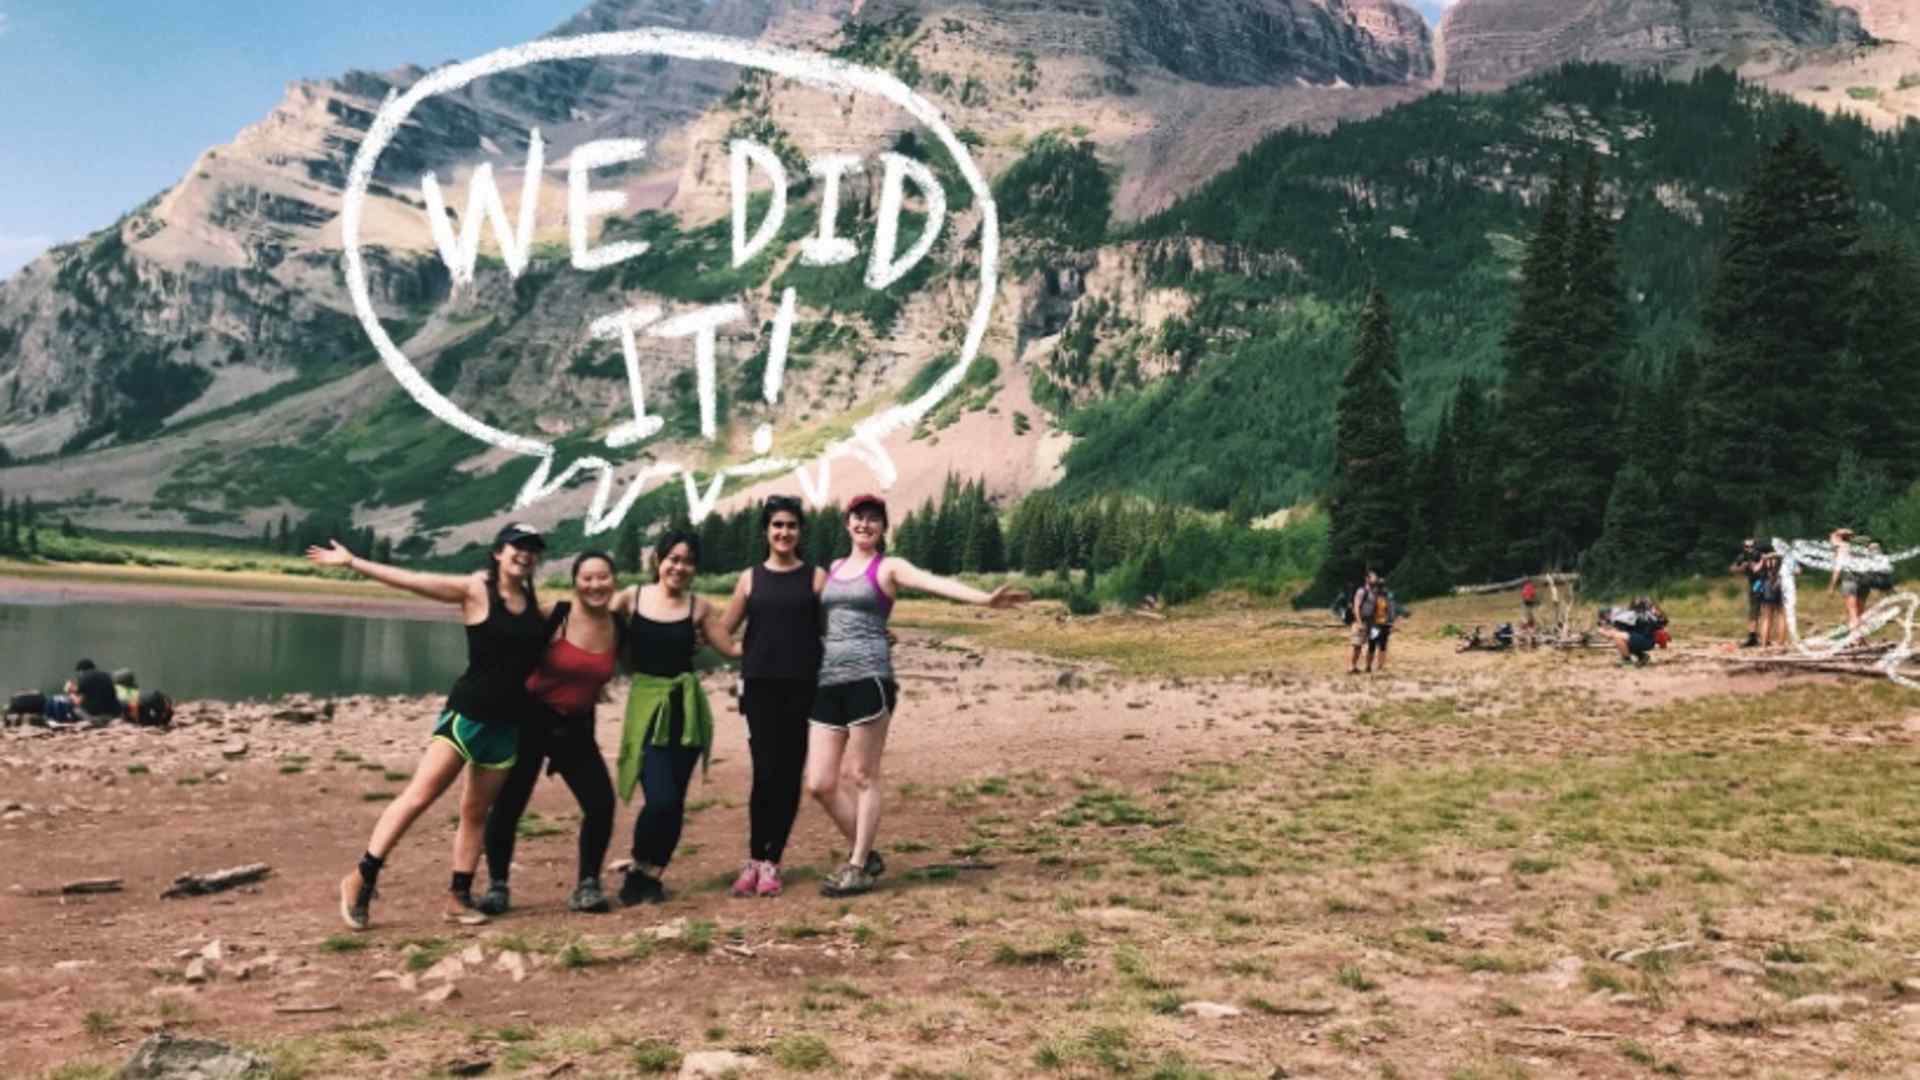 Mei and friends in front of a mountain. A speech bubble reads 'We did it!"